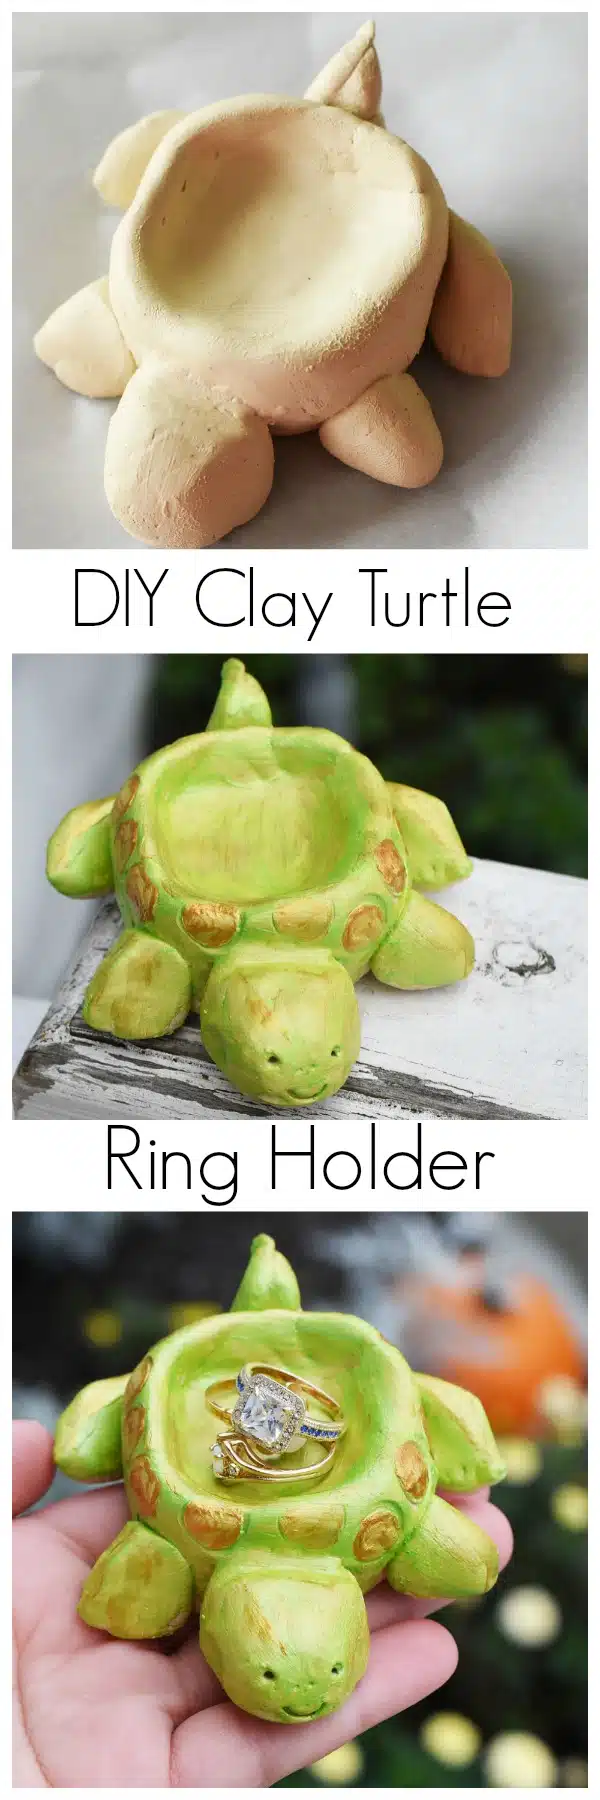 clay-turtle-ring-holder